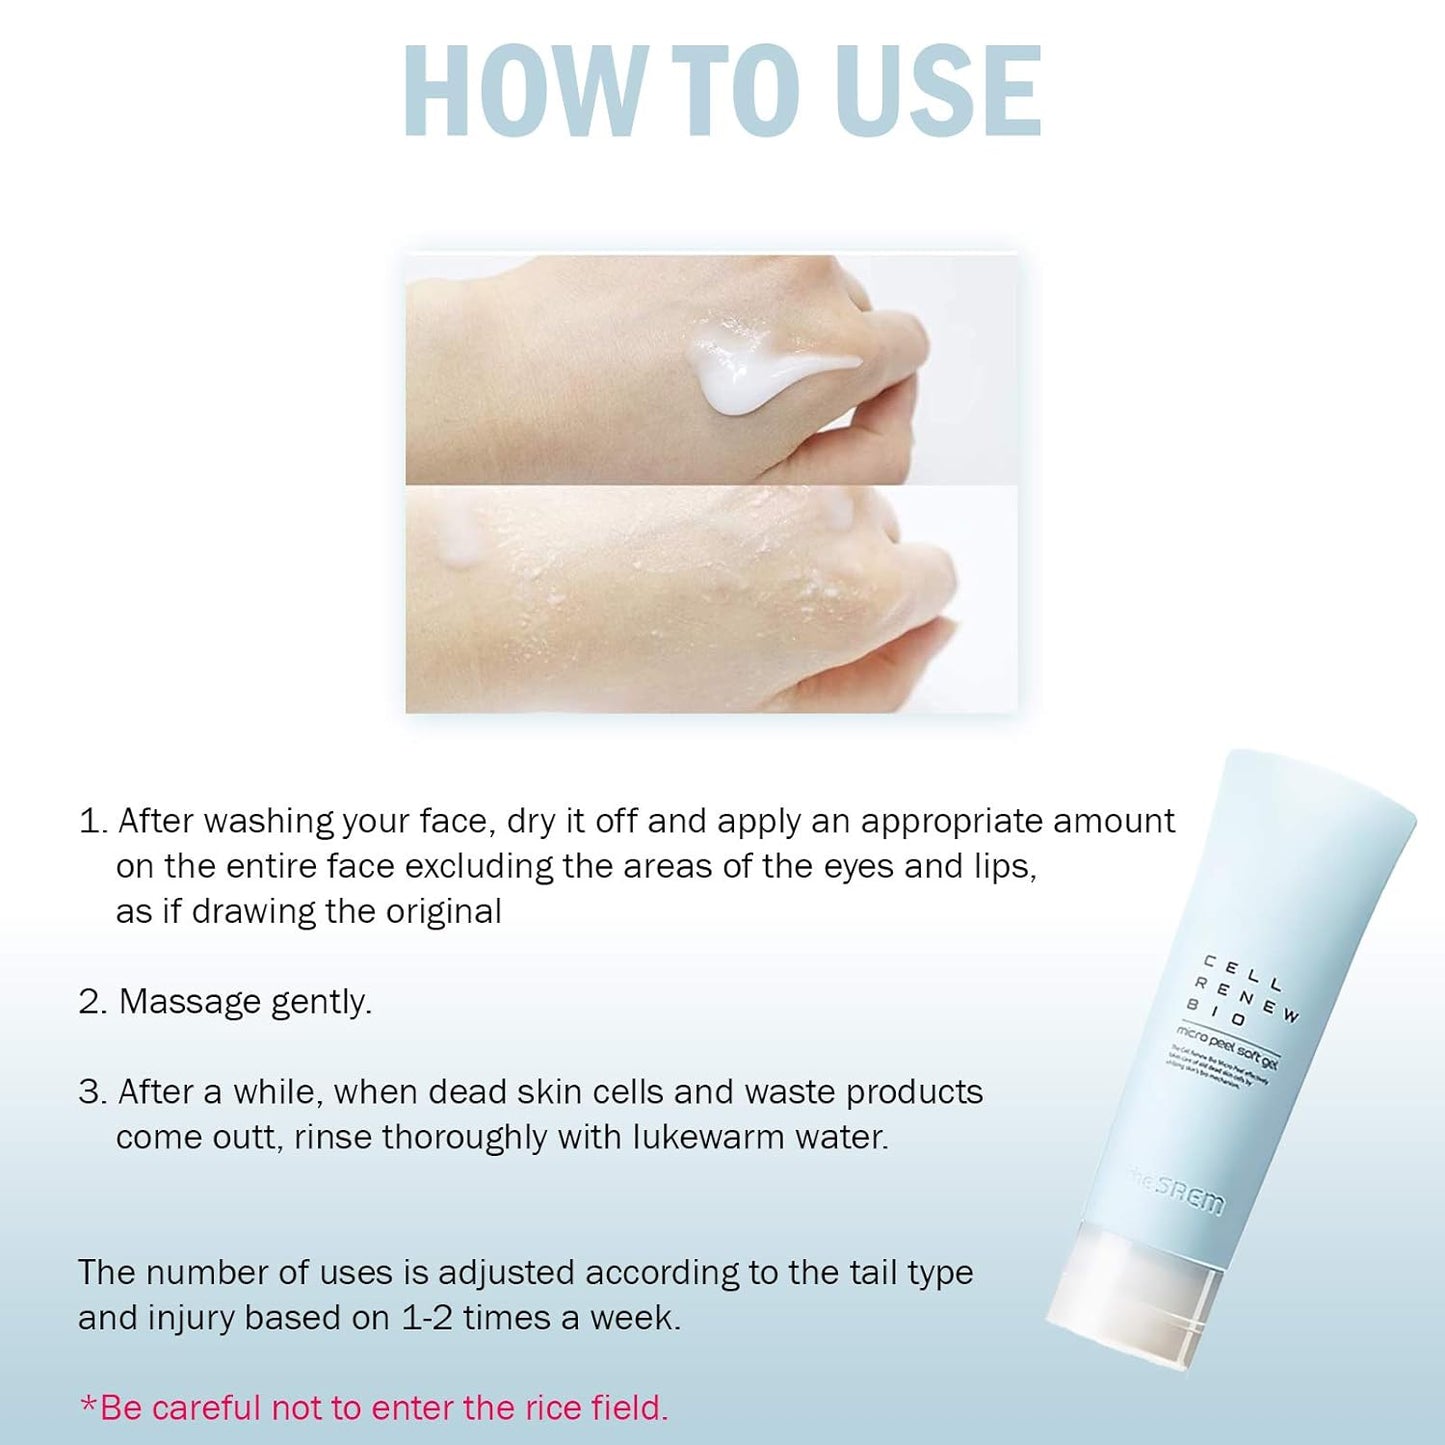 The Saem Cell Renew Bio Micro Peel Soft Gel 160ml- AHA & BHA Mild Peeling Gel, Removes Dead Skin Cells and Impurities from Pores, Skin Firming & Vitality Care,